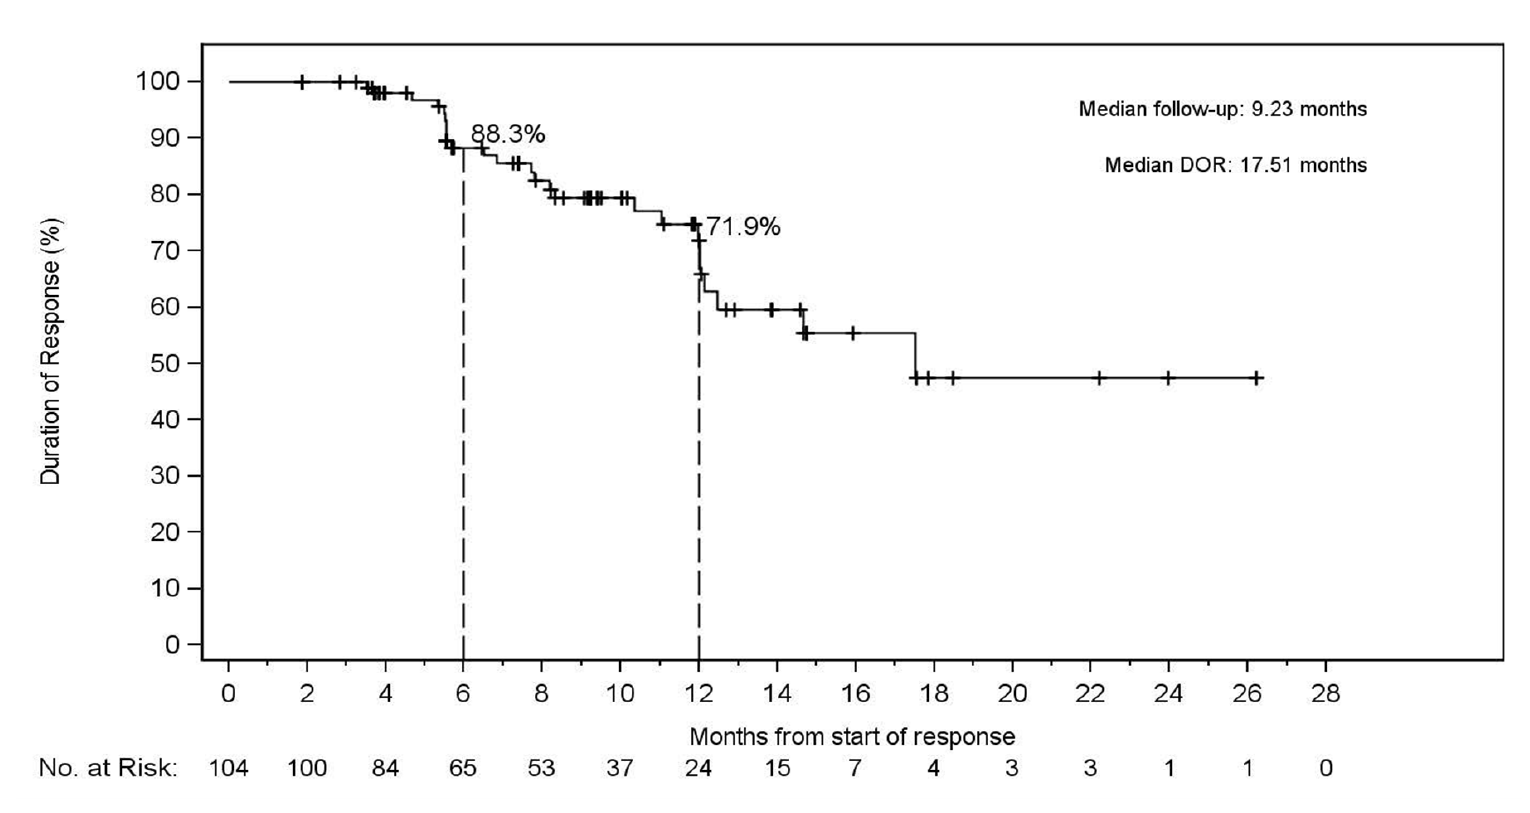 In this Kaplan–Meier plot of duration of response (DOR) in the Integrated Analysis Set (RET Fusion-Positive non–small cell lung cancer with Prior Platinum Chemotherapy) based on the independent radiographic committee assessment, the number of at-risk patients receiving selpercatinib at 0, 2, 4, 6, 8, 12, 14, 16, 18, 20, 22, 24, 26, and 28 months was 104, 100, 84, 65, 53, 37, 24, 15, 7, 4, 3, 3, 1, 1, and 0. The median DOR was 17.51 months.